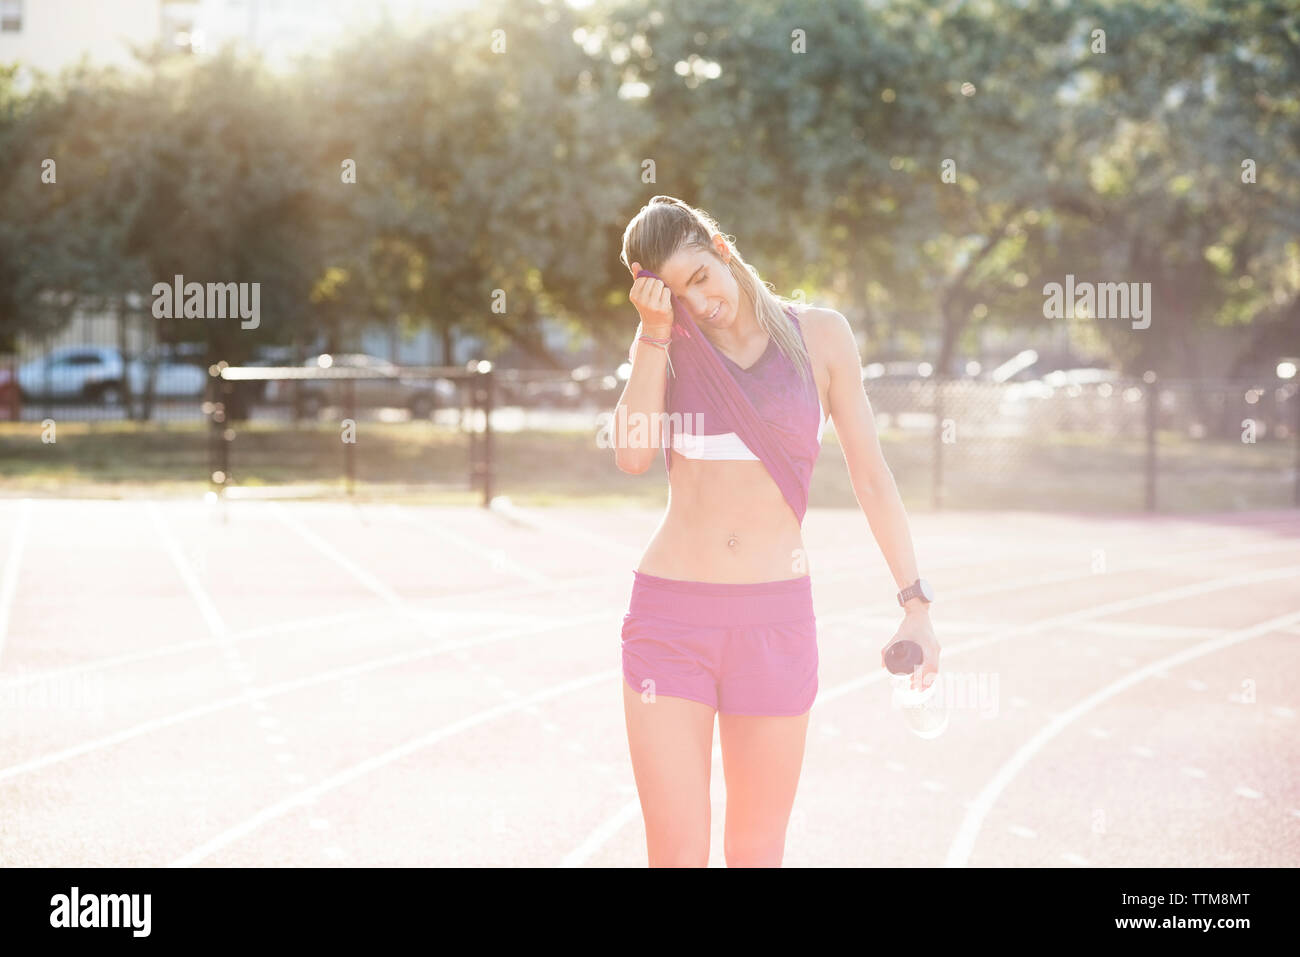 Tired female athlete wiping sweat on field Stock Photo